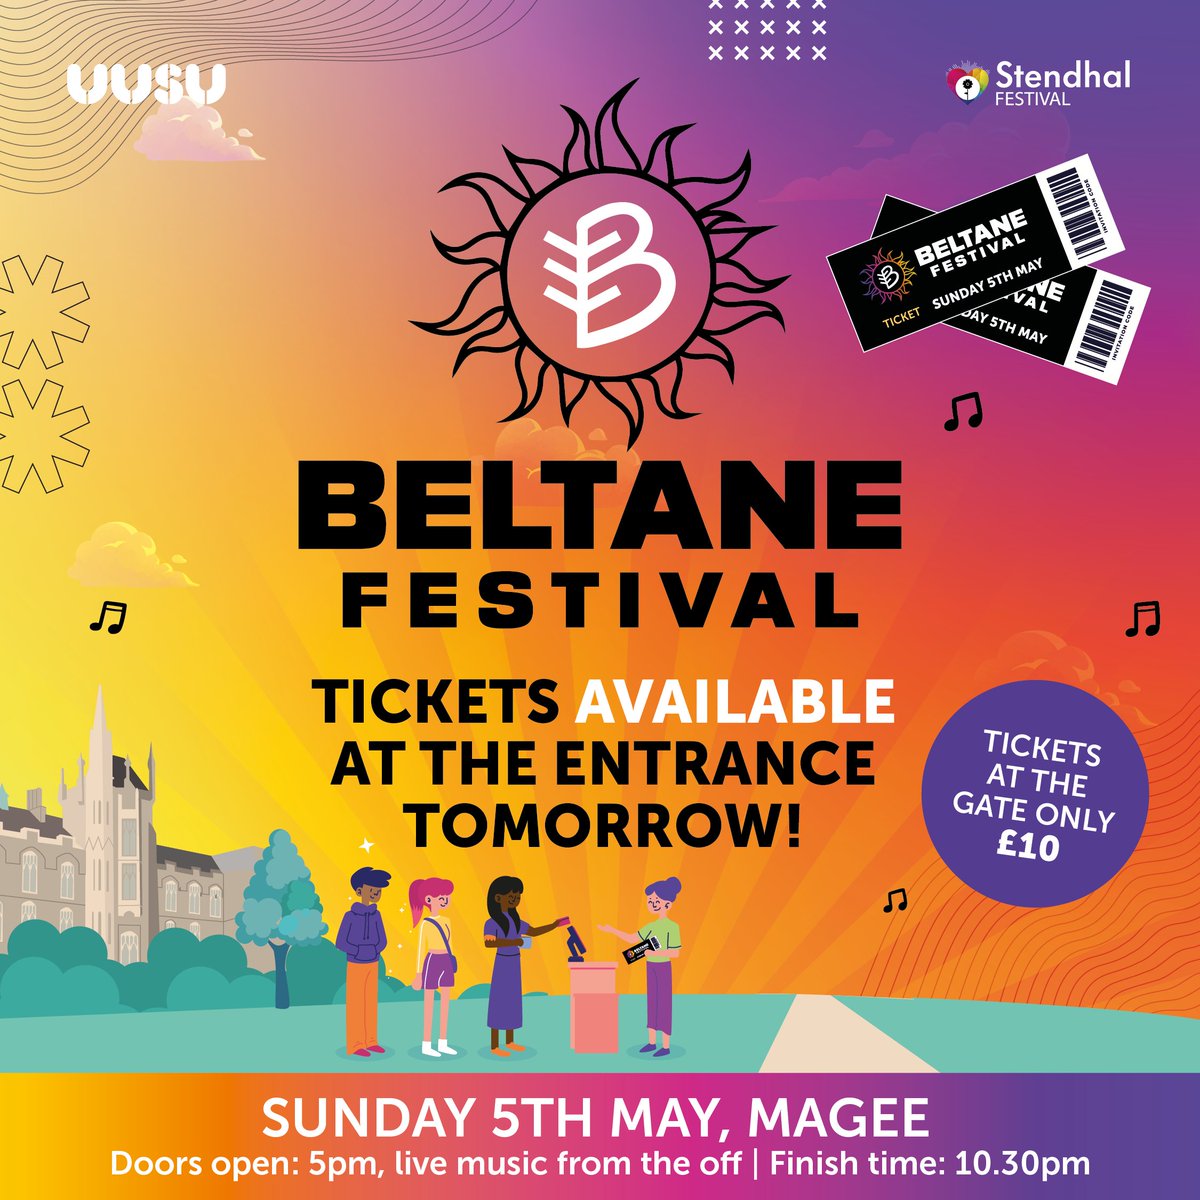 We’ve been counting down to our Beltane Festival & it’s almost here 🤩 As some of you have been still making your minds up and convincing your mates to come, we will have tickets on the gate for just £10 💸 Get all the important info here uusu.org/news/article/6…